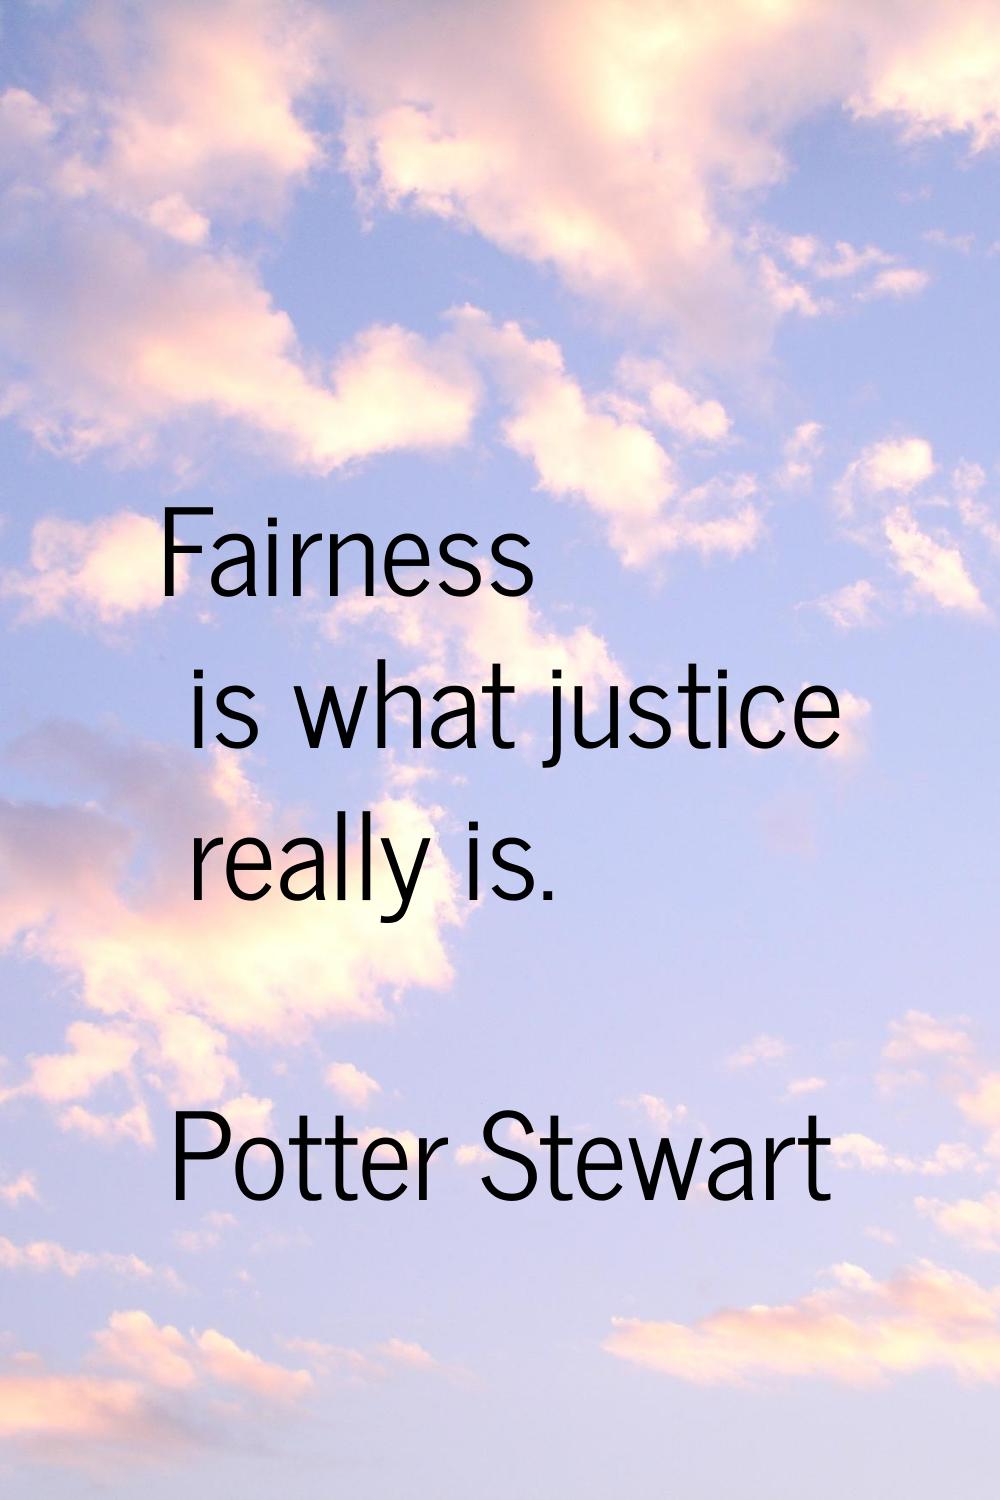 Fairness is what justice really is.